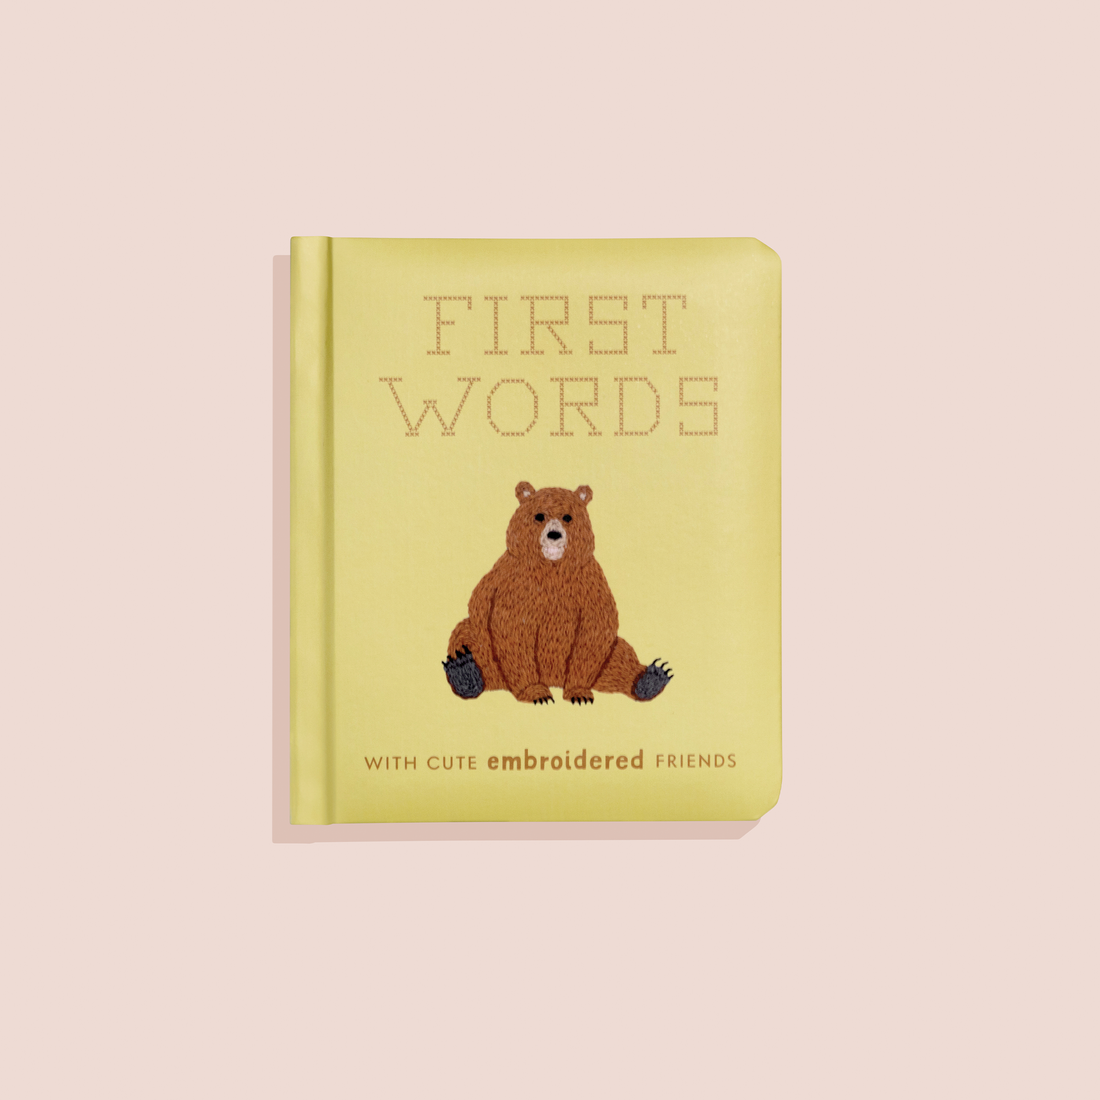 First Words with Cute Embroidered Friends by Libby Moore